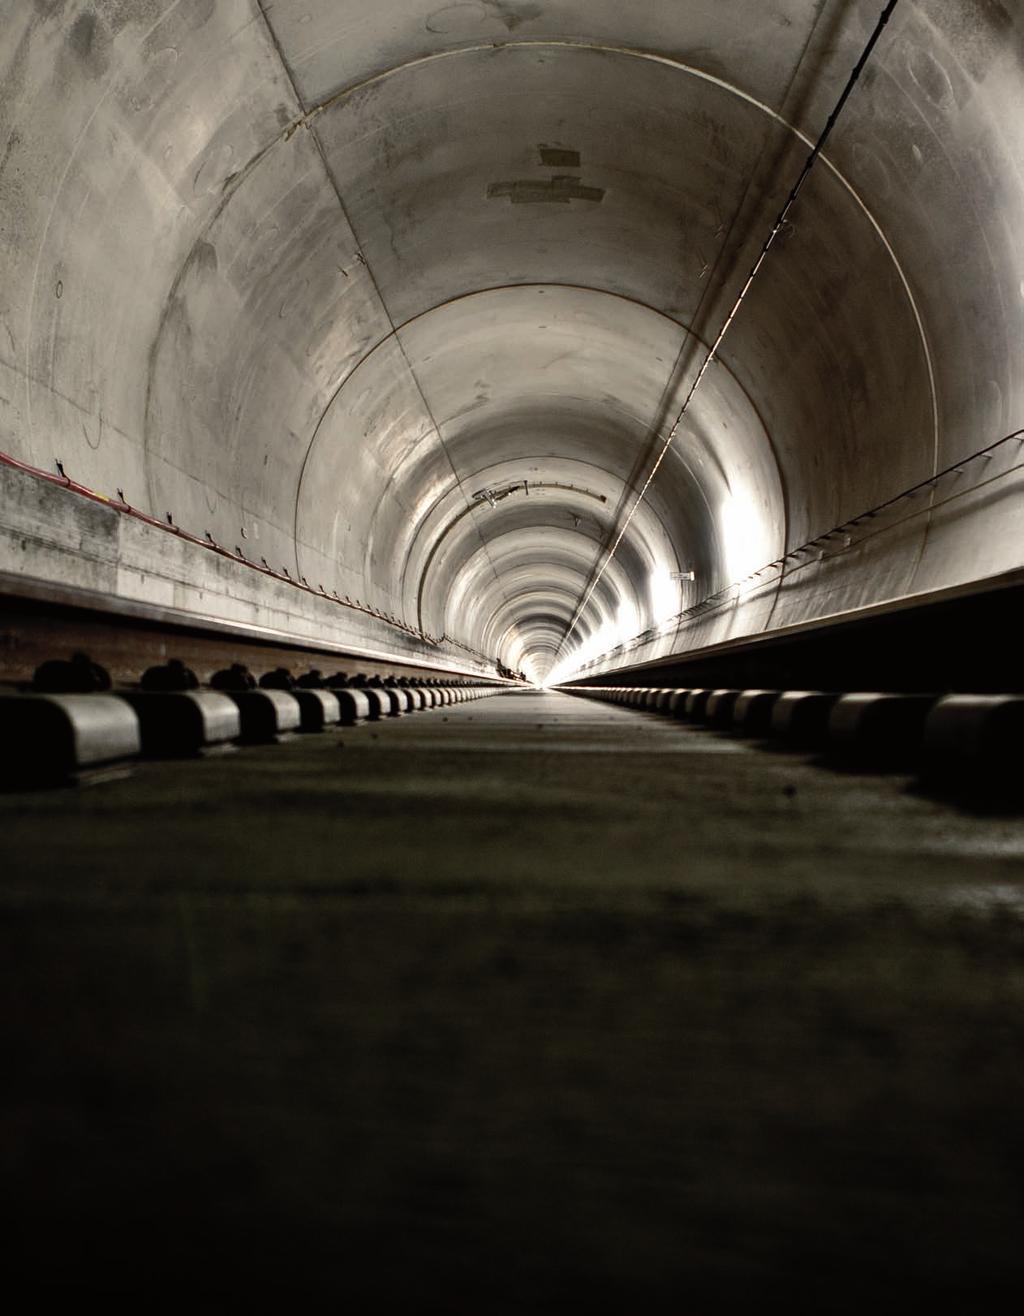 Safety in tunnels Hand rail system for rail tunnels In accordance with the requirements of the TSI (technical specification for interoperability), all tunnels in the trans-european high-speed rail